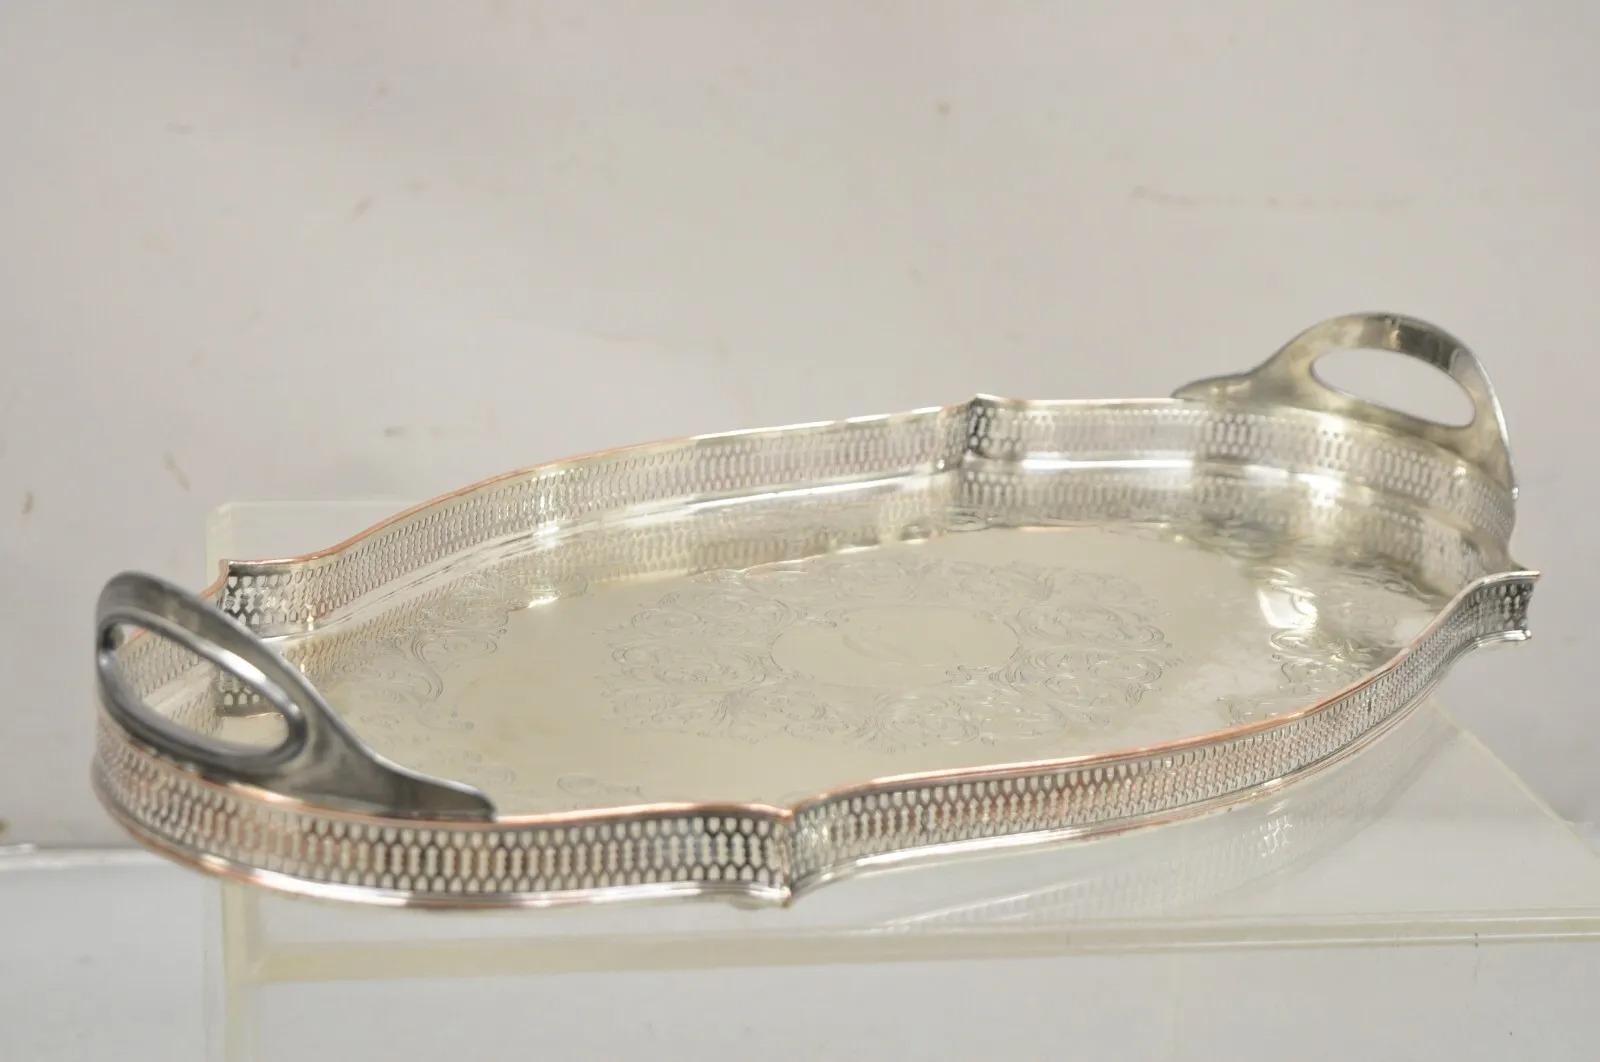 Vintage English LBS Co 982 Silver Plated Scalloped Oval Pierced Gallery Tray. L'article comporte un monogramme 